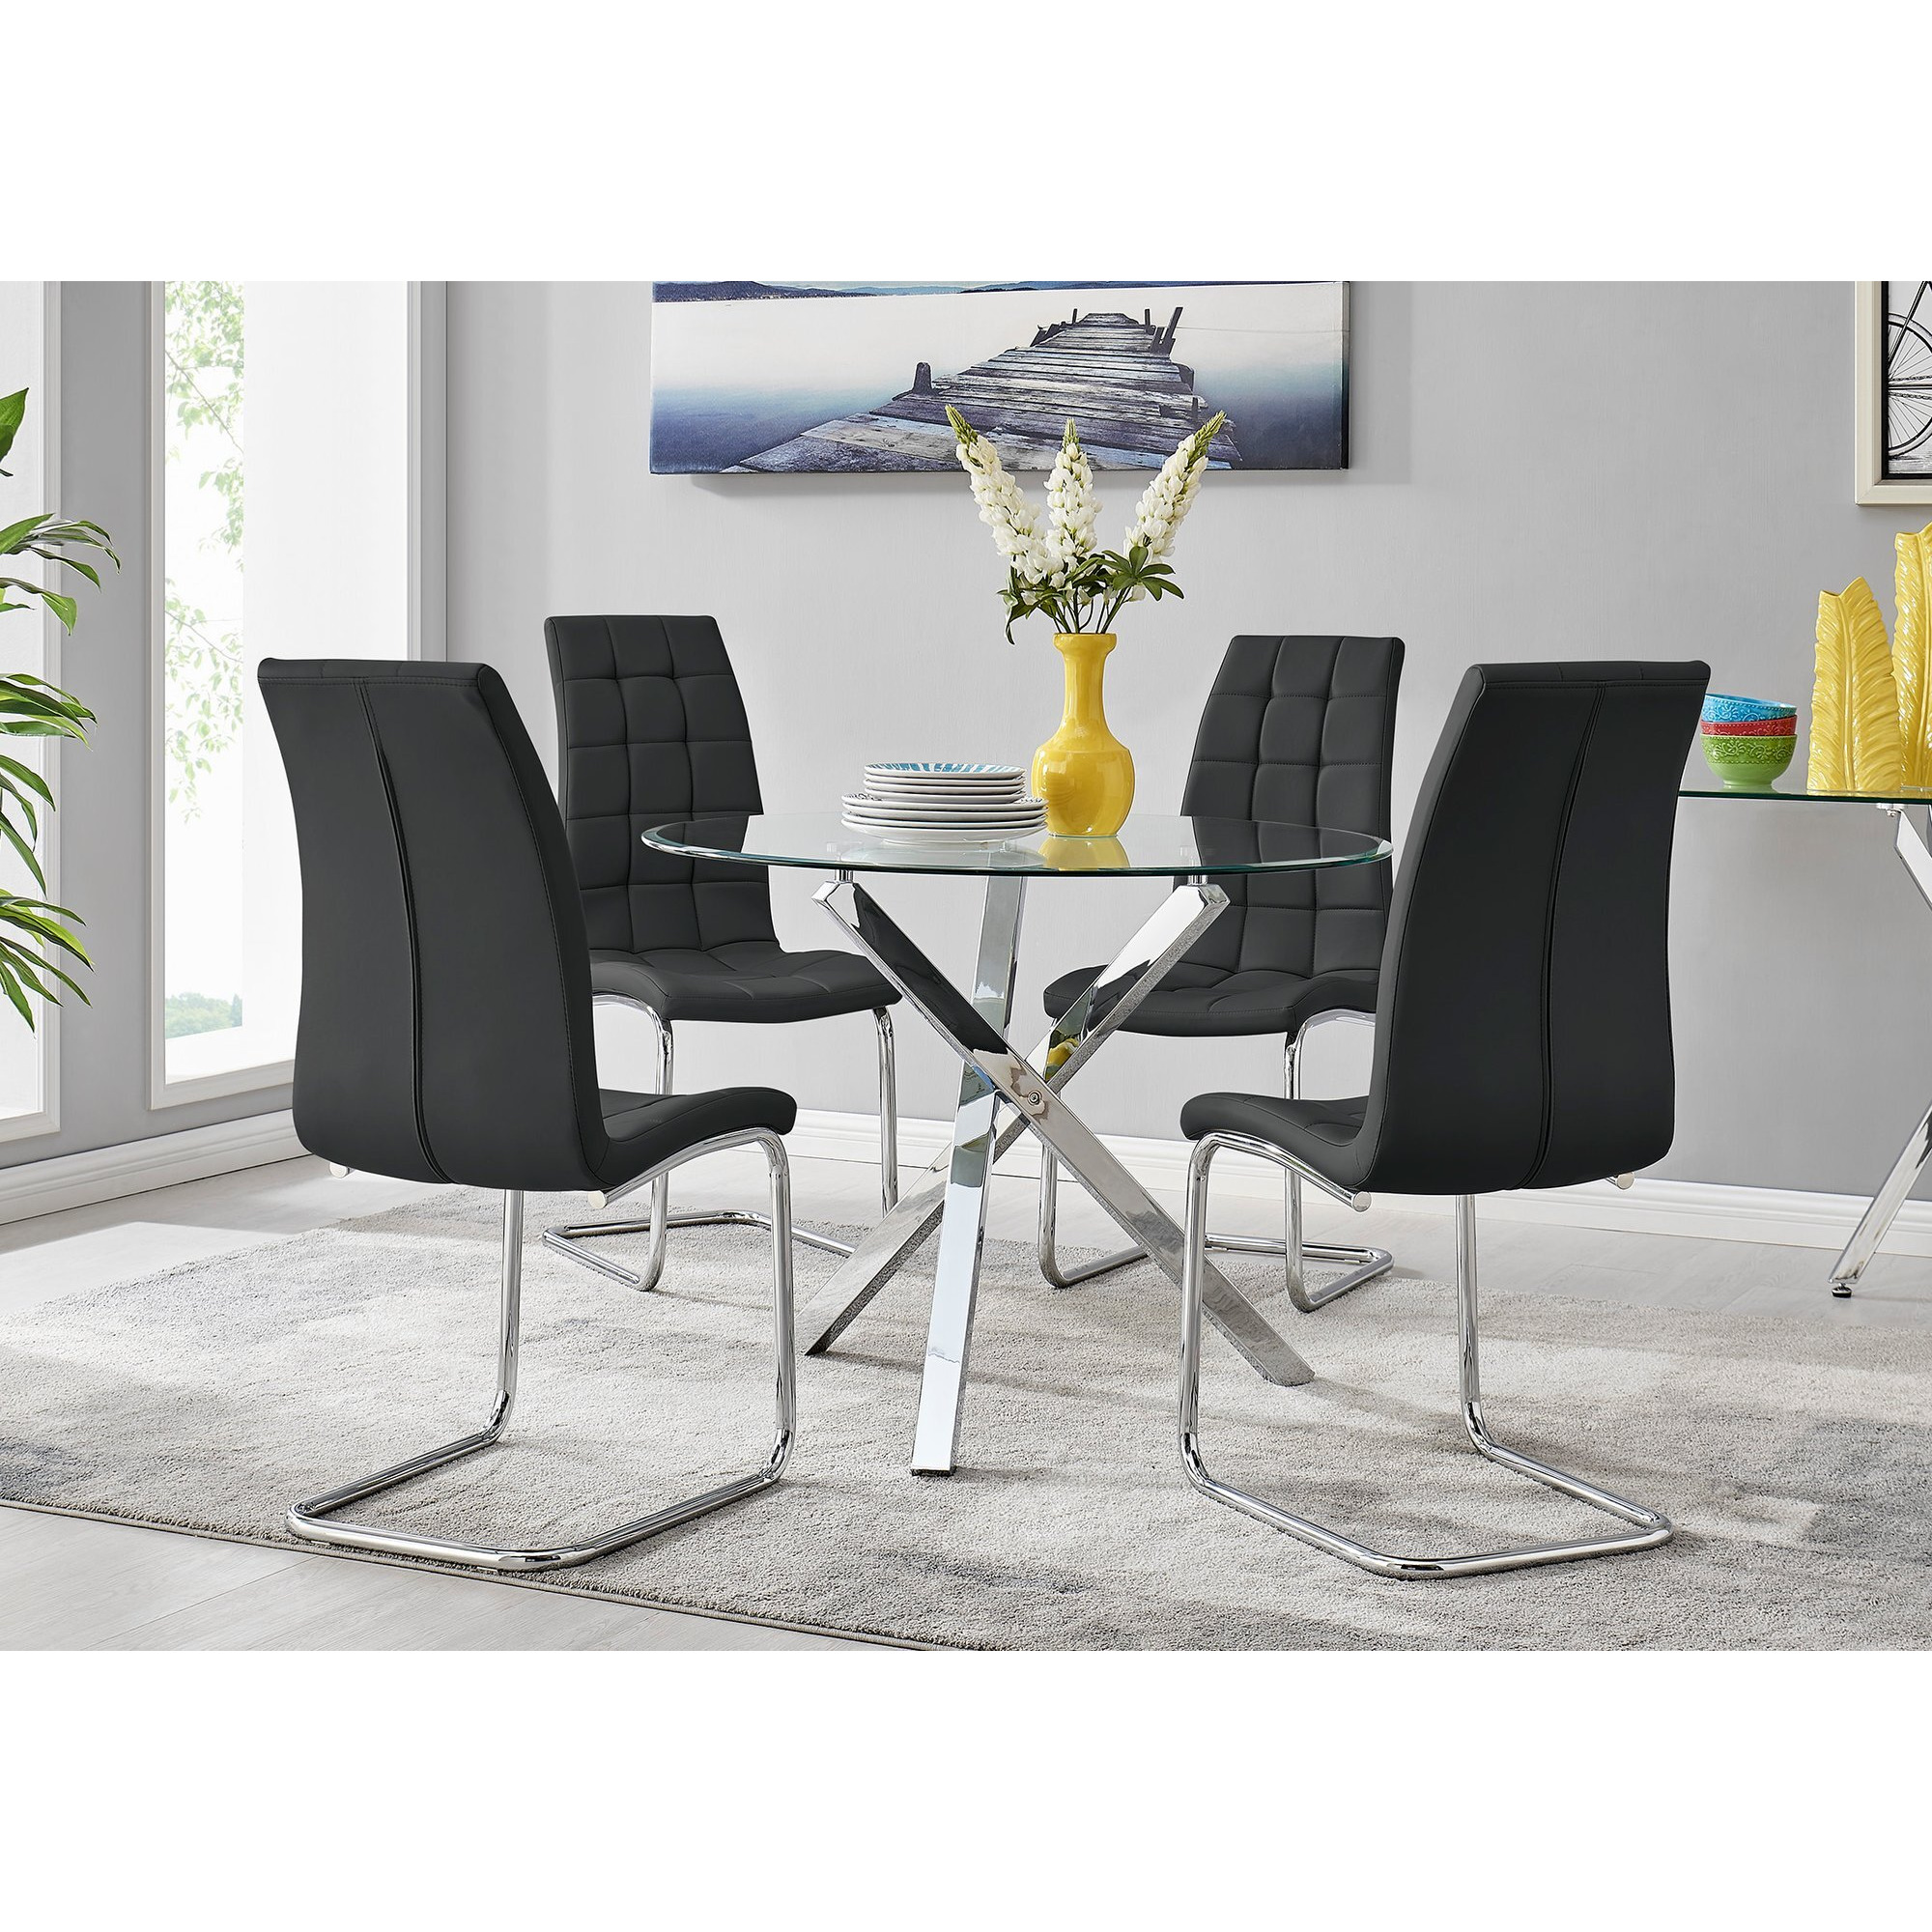 Selina Chrome Round Square Leg Glass Dining Table And 4 Murano Chairs Set